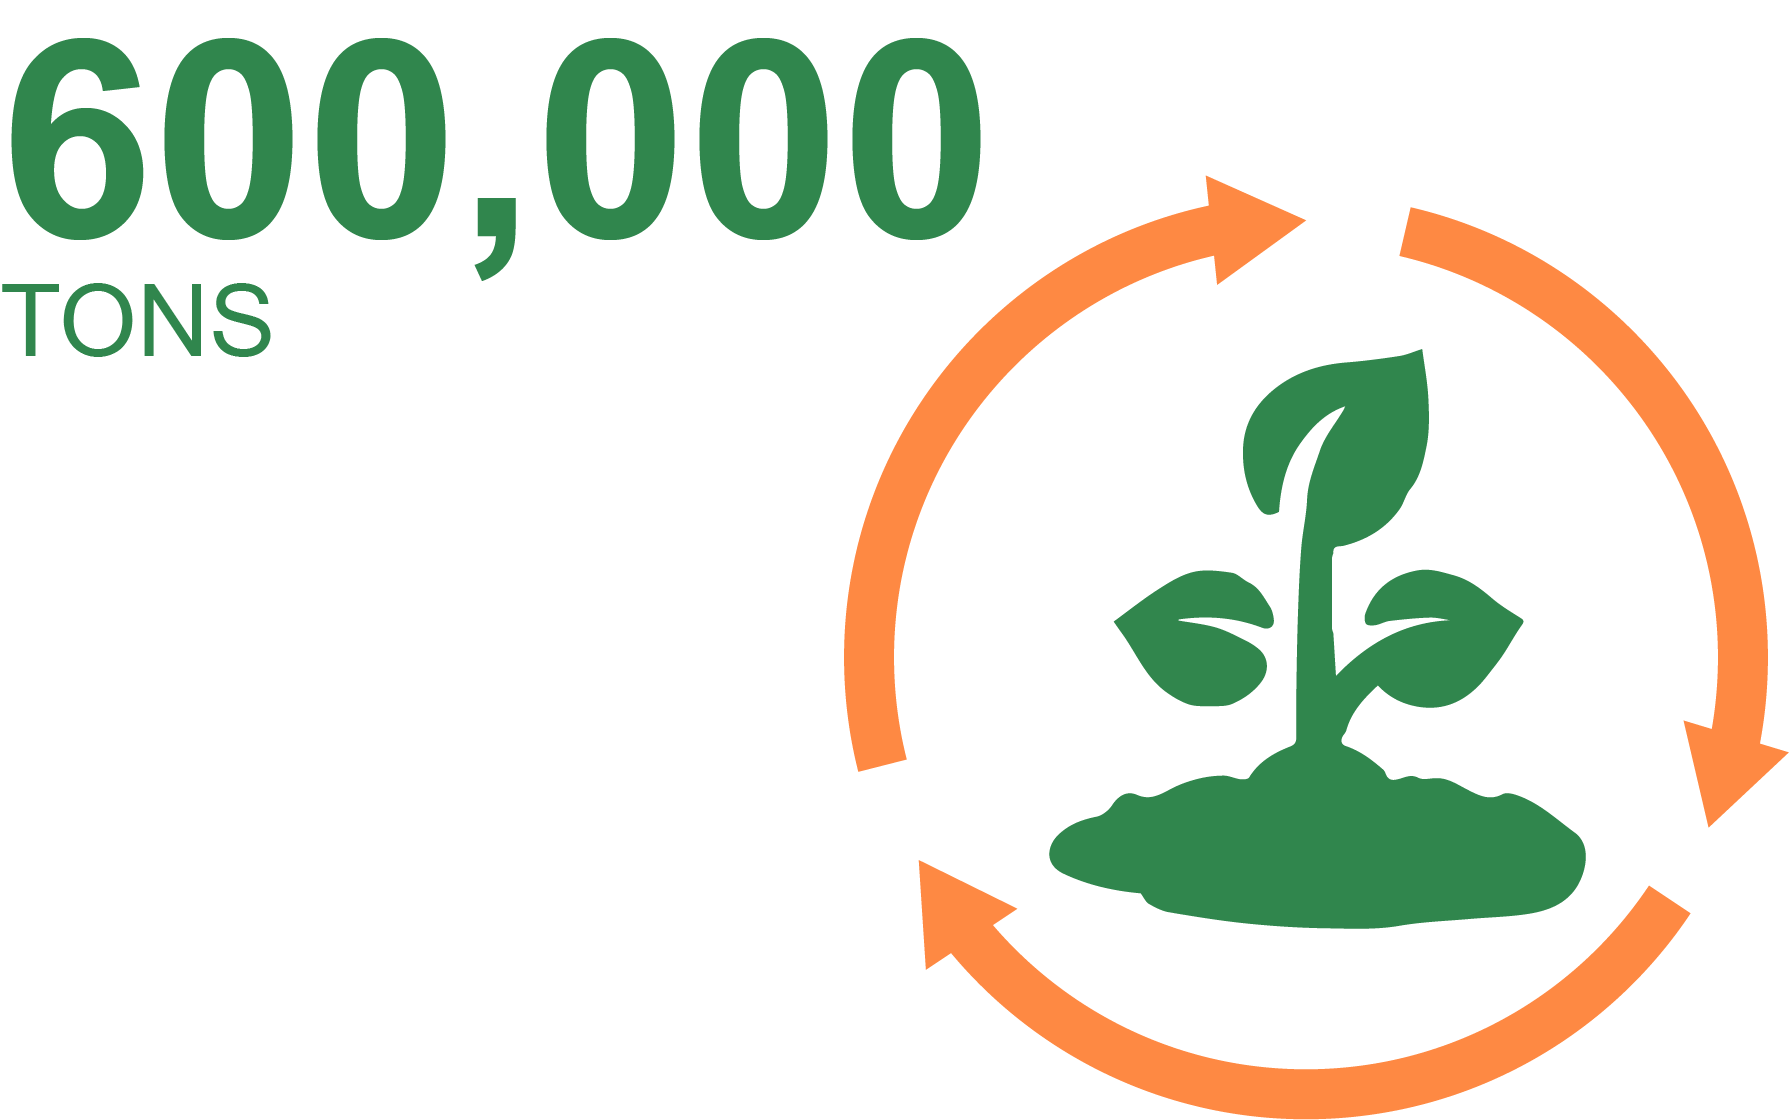 600,000 tons of soil recycled